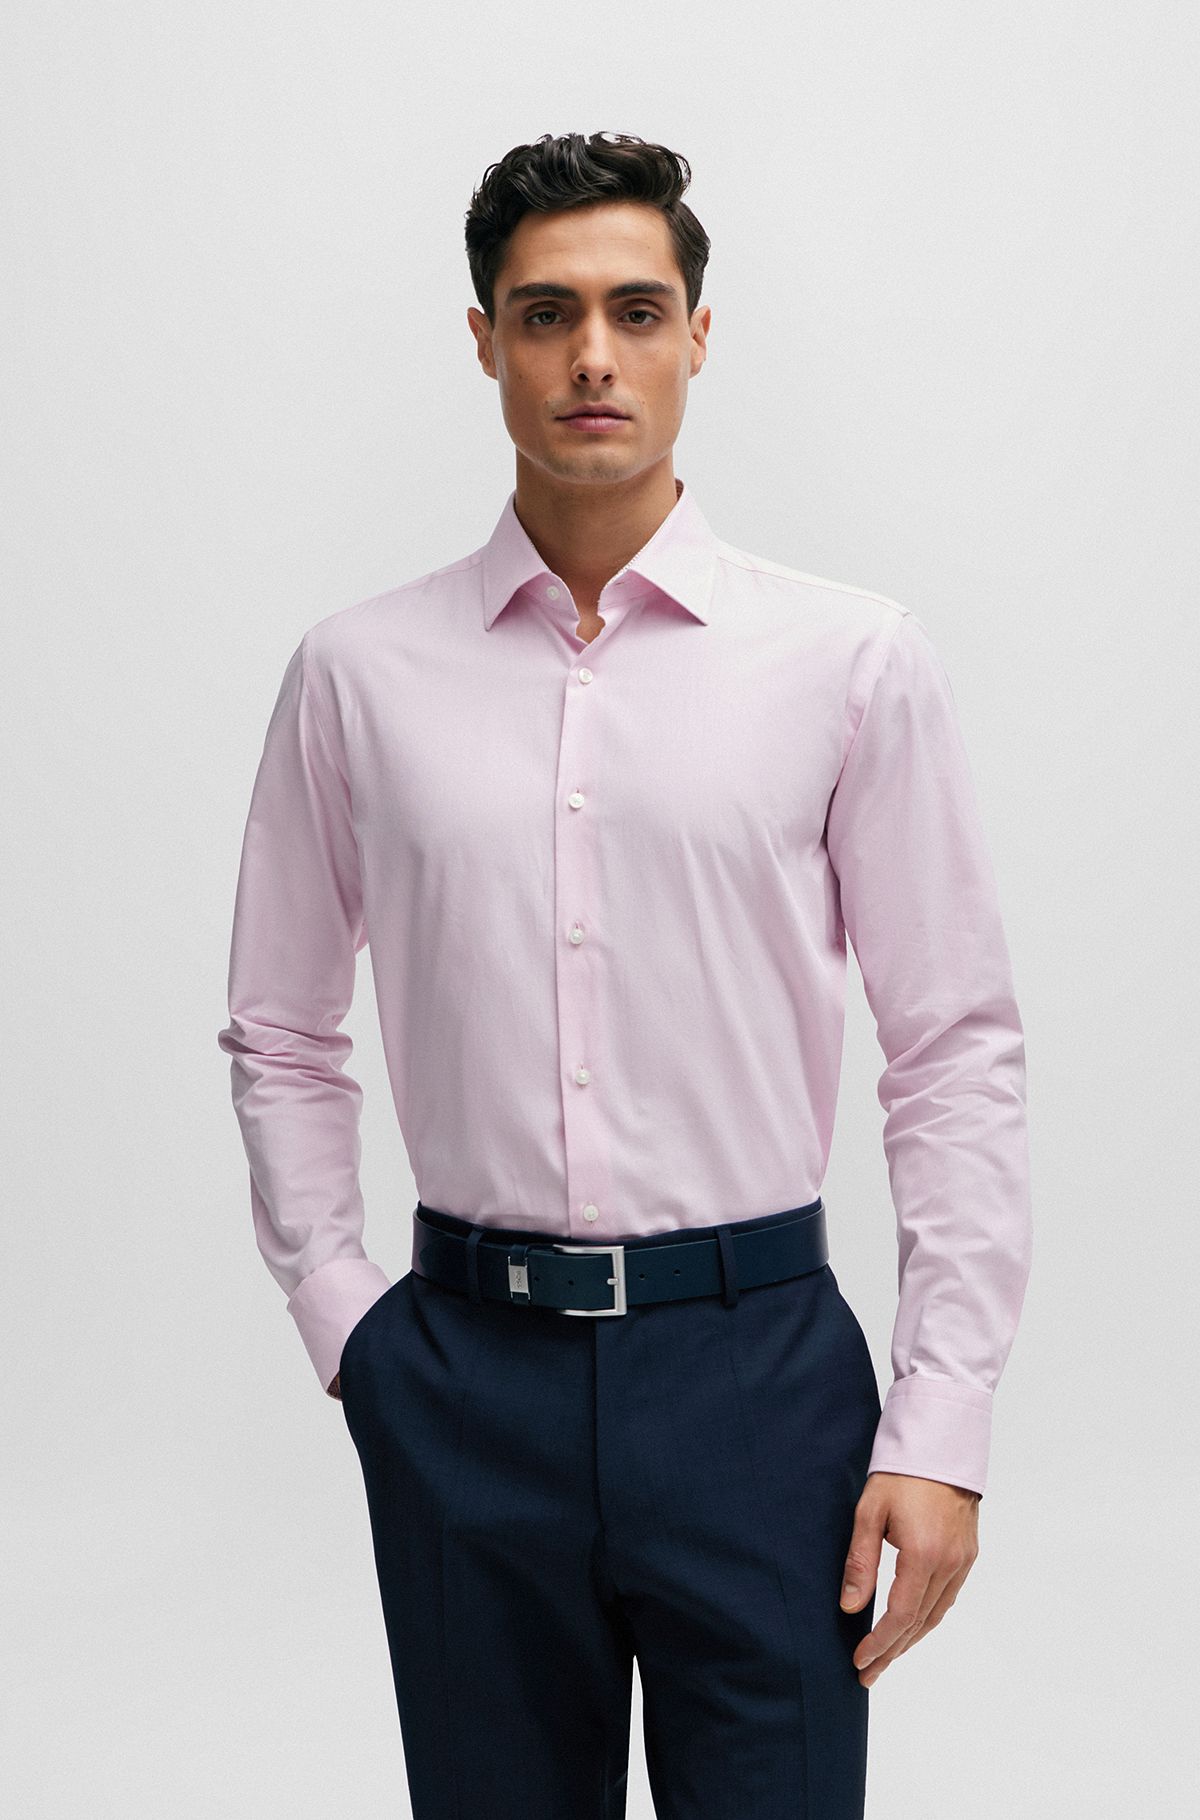 Regular-fit shirt in easy-iron Oxford stretch cotton, light pink